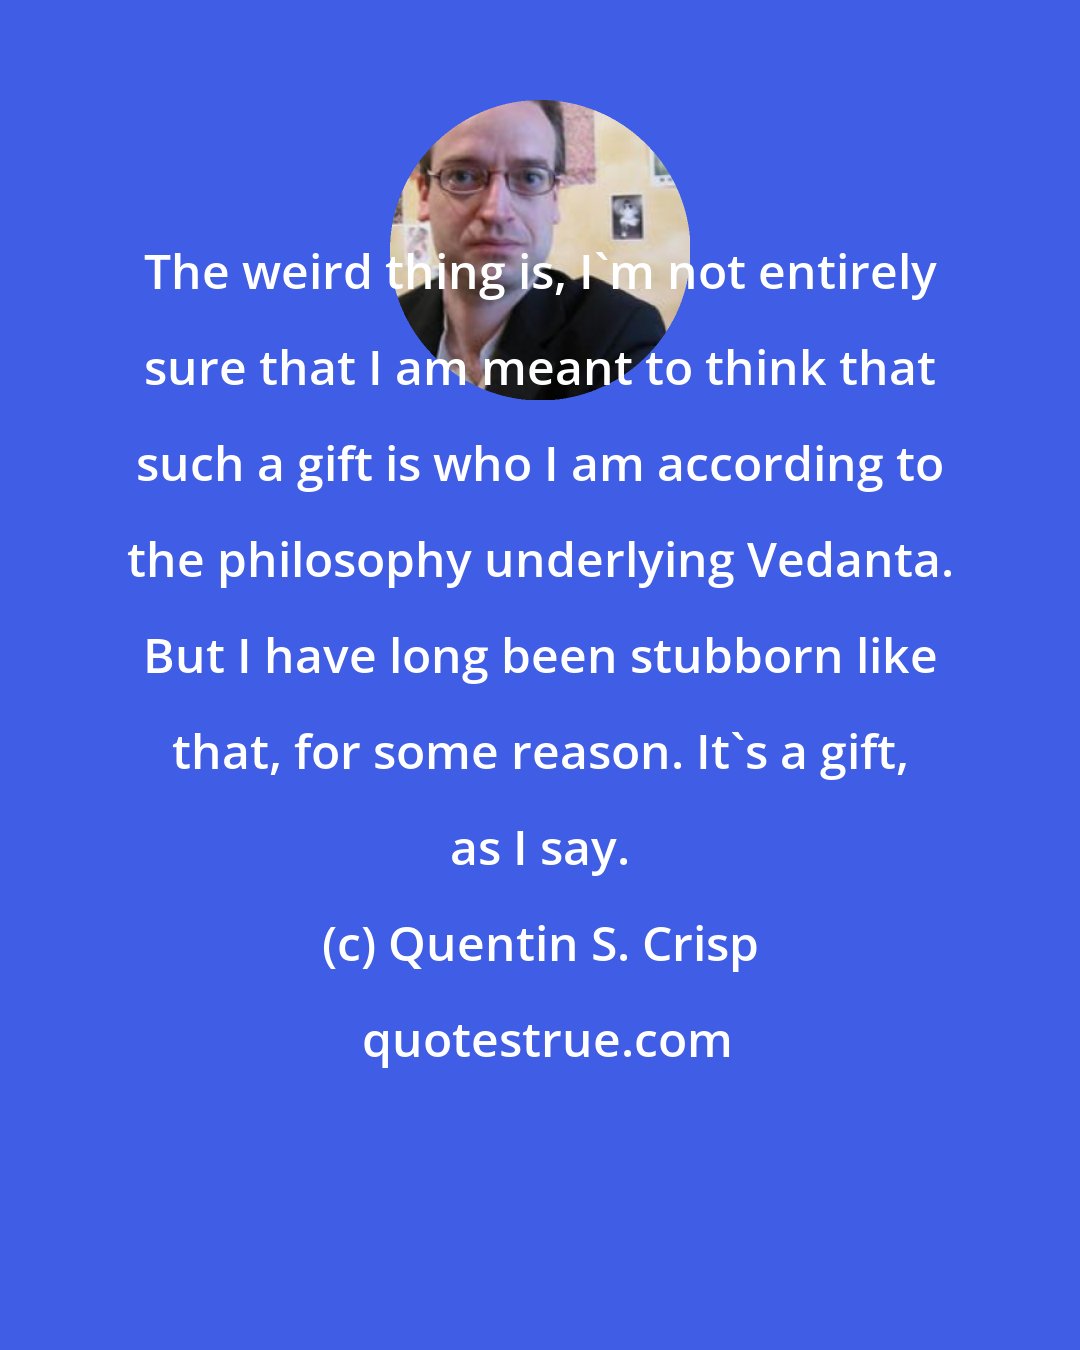 Quentin S. Crisp: The weird thing is, I'm not entirely sure that I am meant to think that such a gift is who I am according to the philosophy underlying Vedanta. But I have long been stubborn like that, for some reason. It's a gift, as I say.